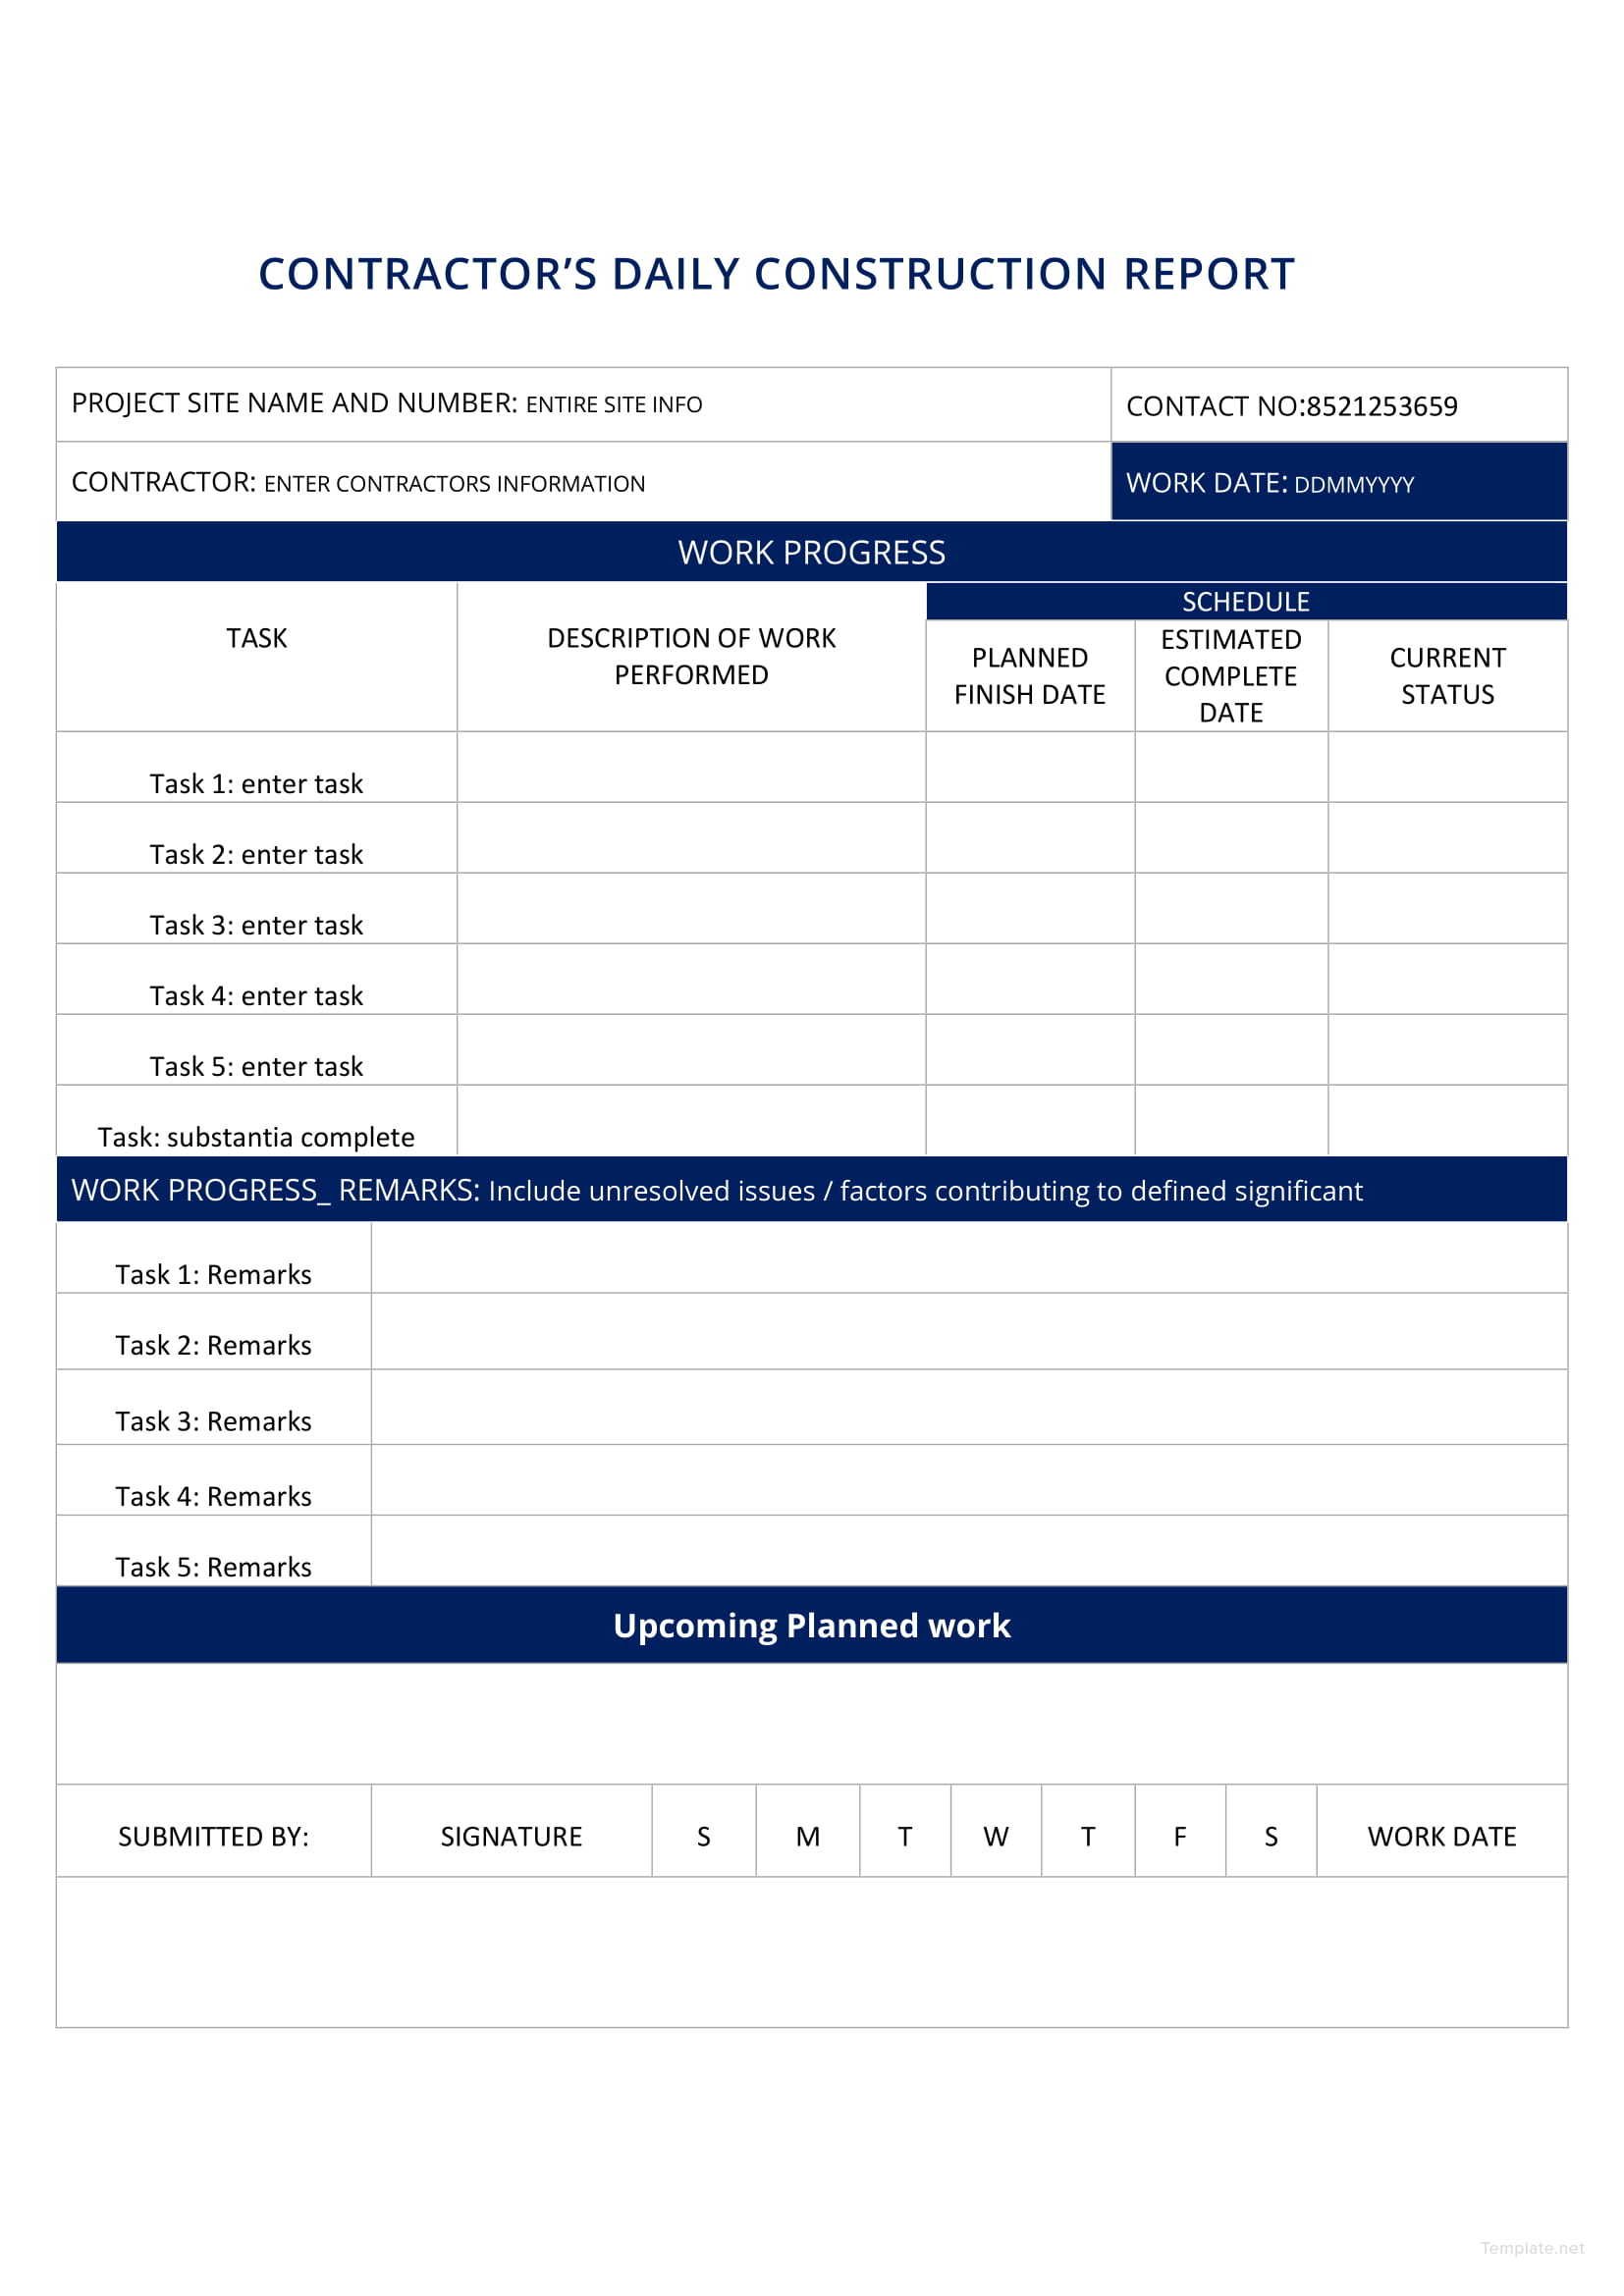 Daily Construction Report Template in Microsoft Word, PDF, Apple Pages